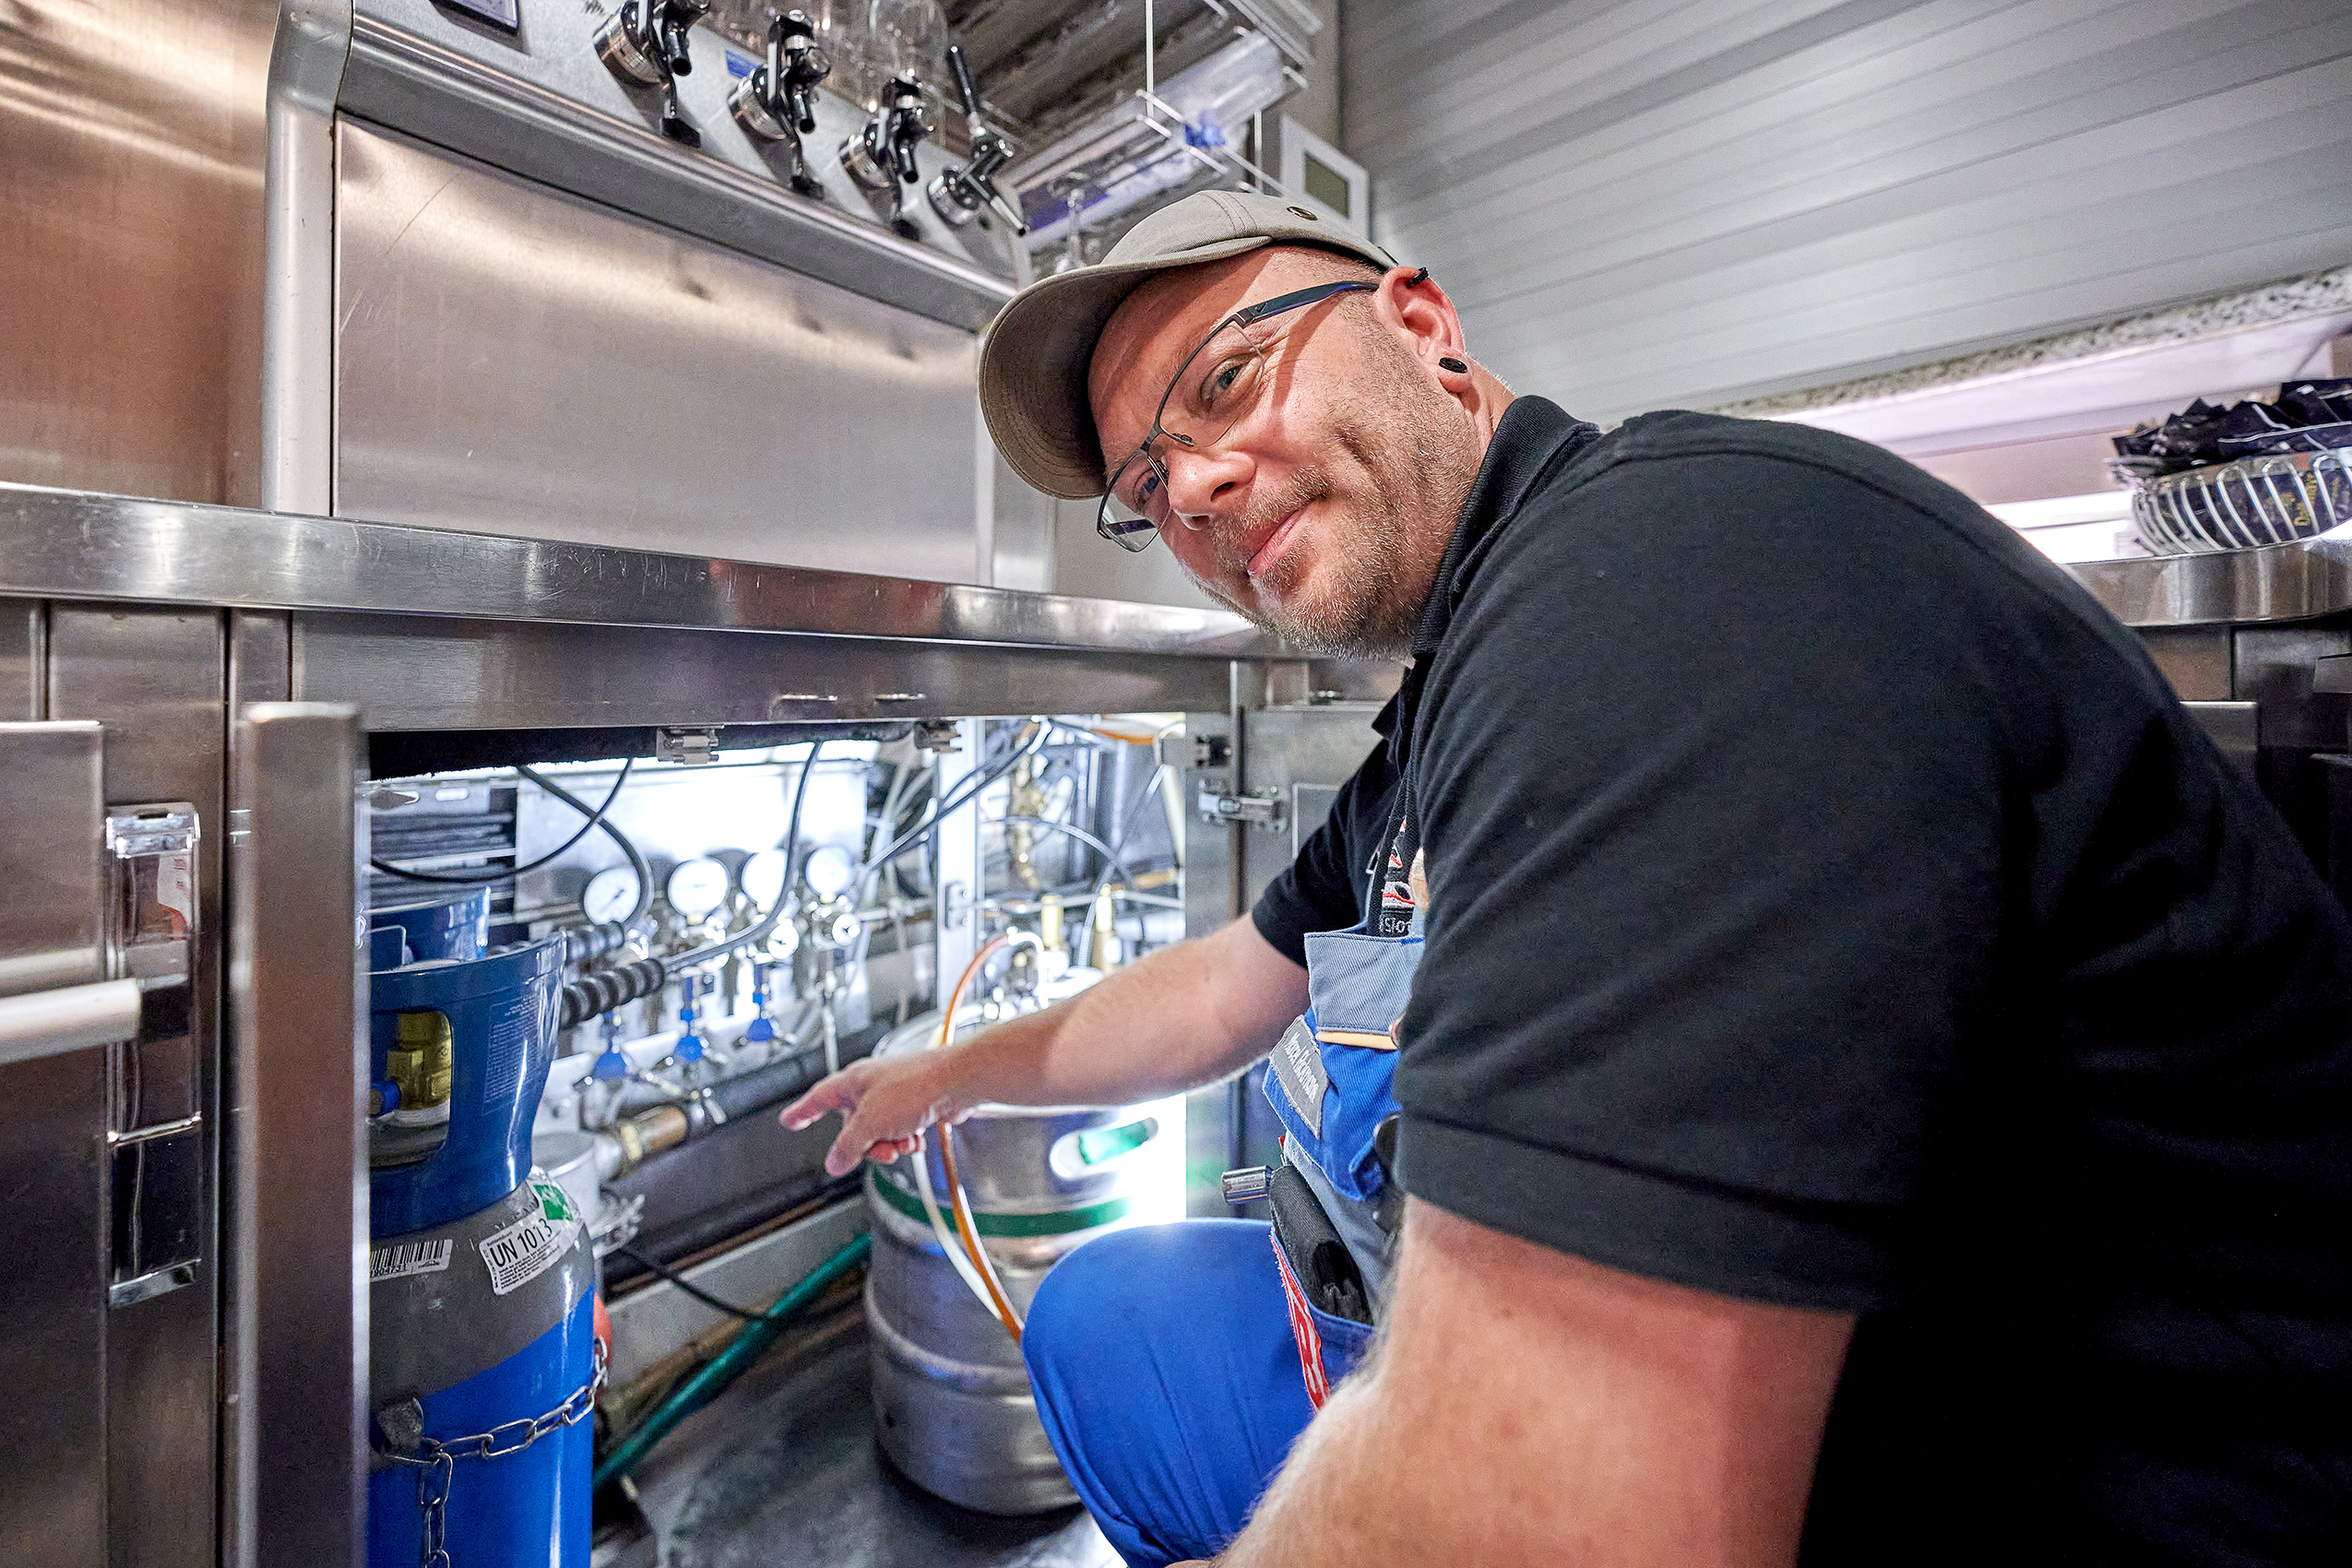 Beer pumps in the narrow on-board kitchen need a supply of CO<sub>2</sub>. This is a job for mechatronics specialist Marcel Rickmann.